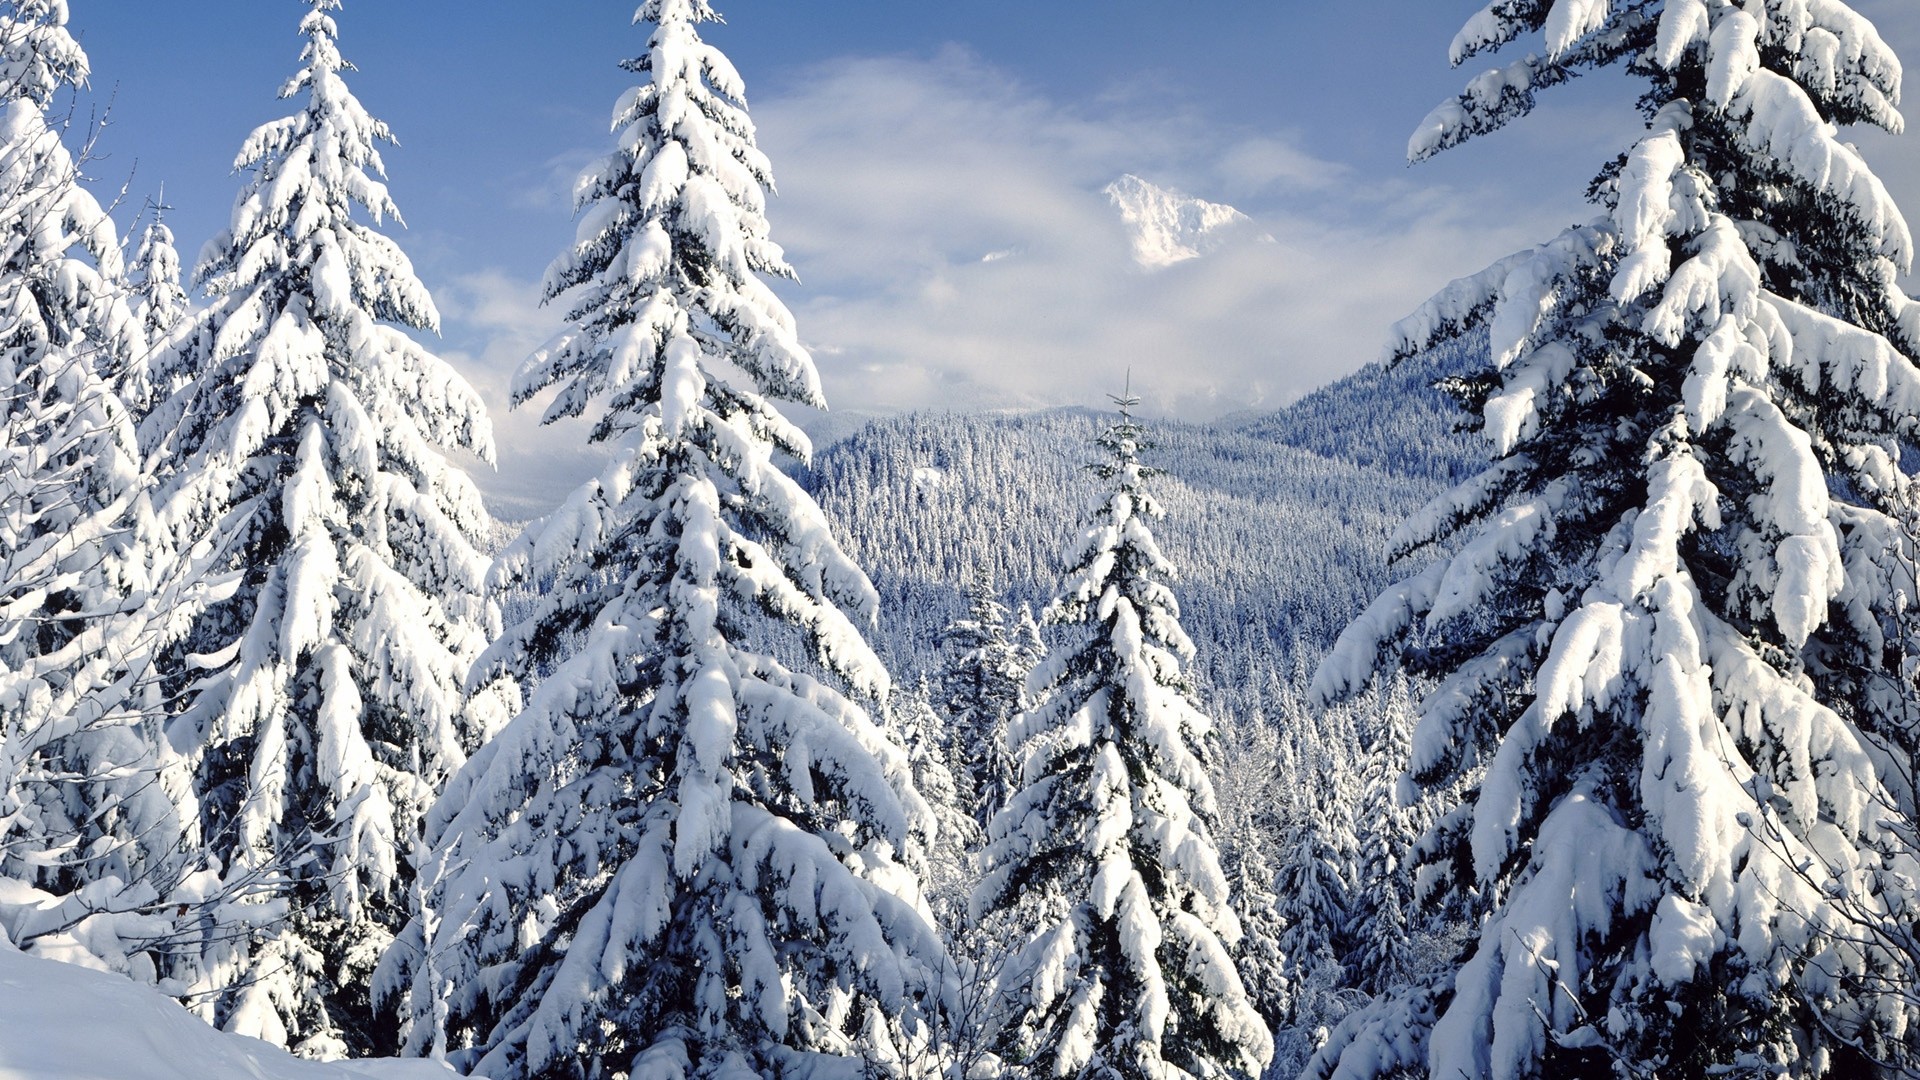 General 1920x1080 nature winter snow frost pine trees snowy peak landscape mountains cold ice outdoors